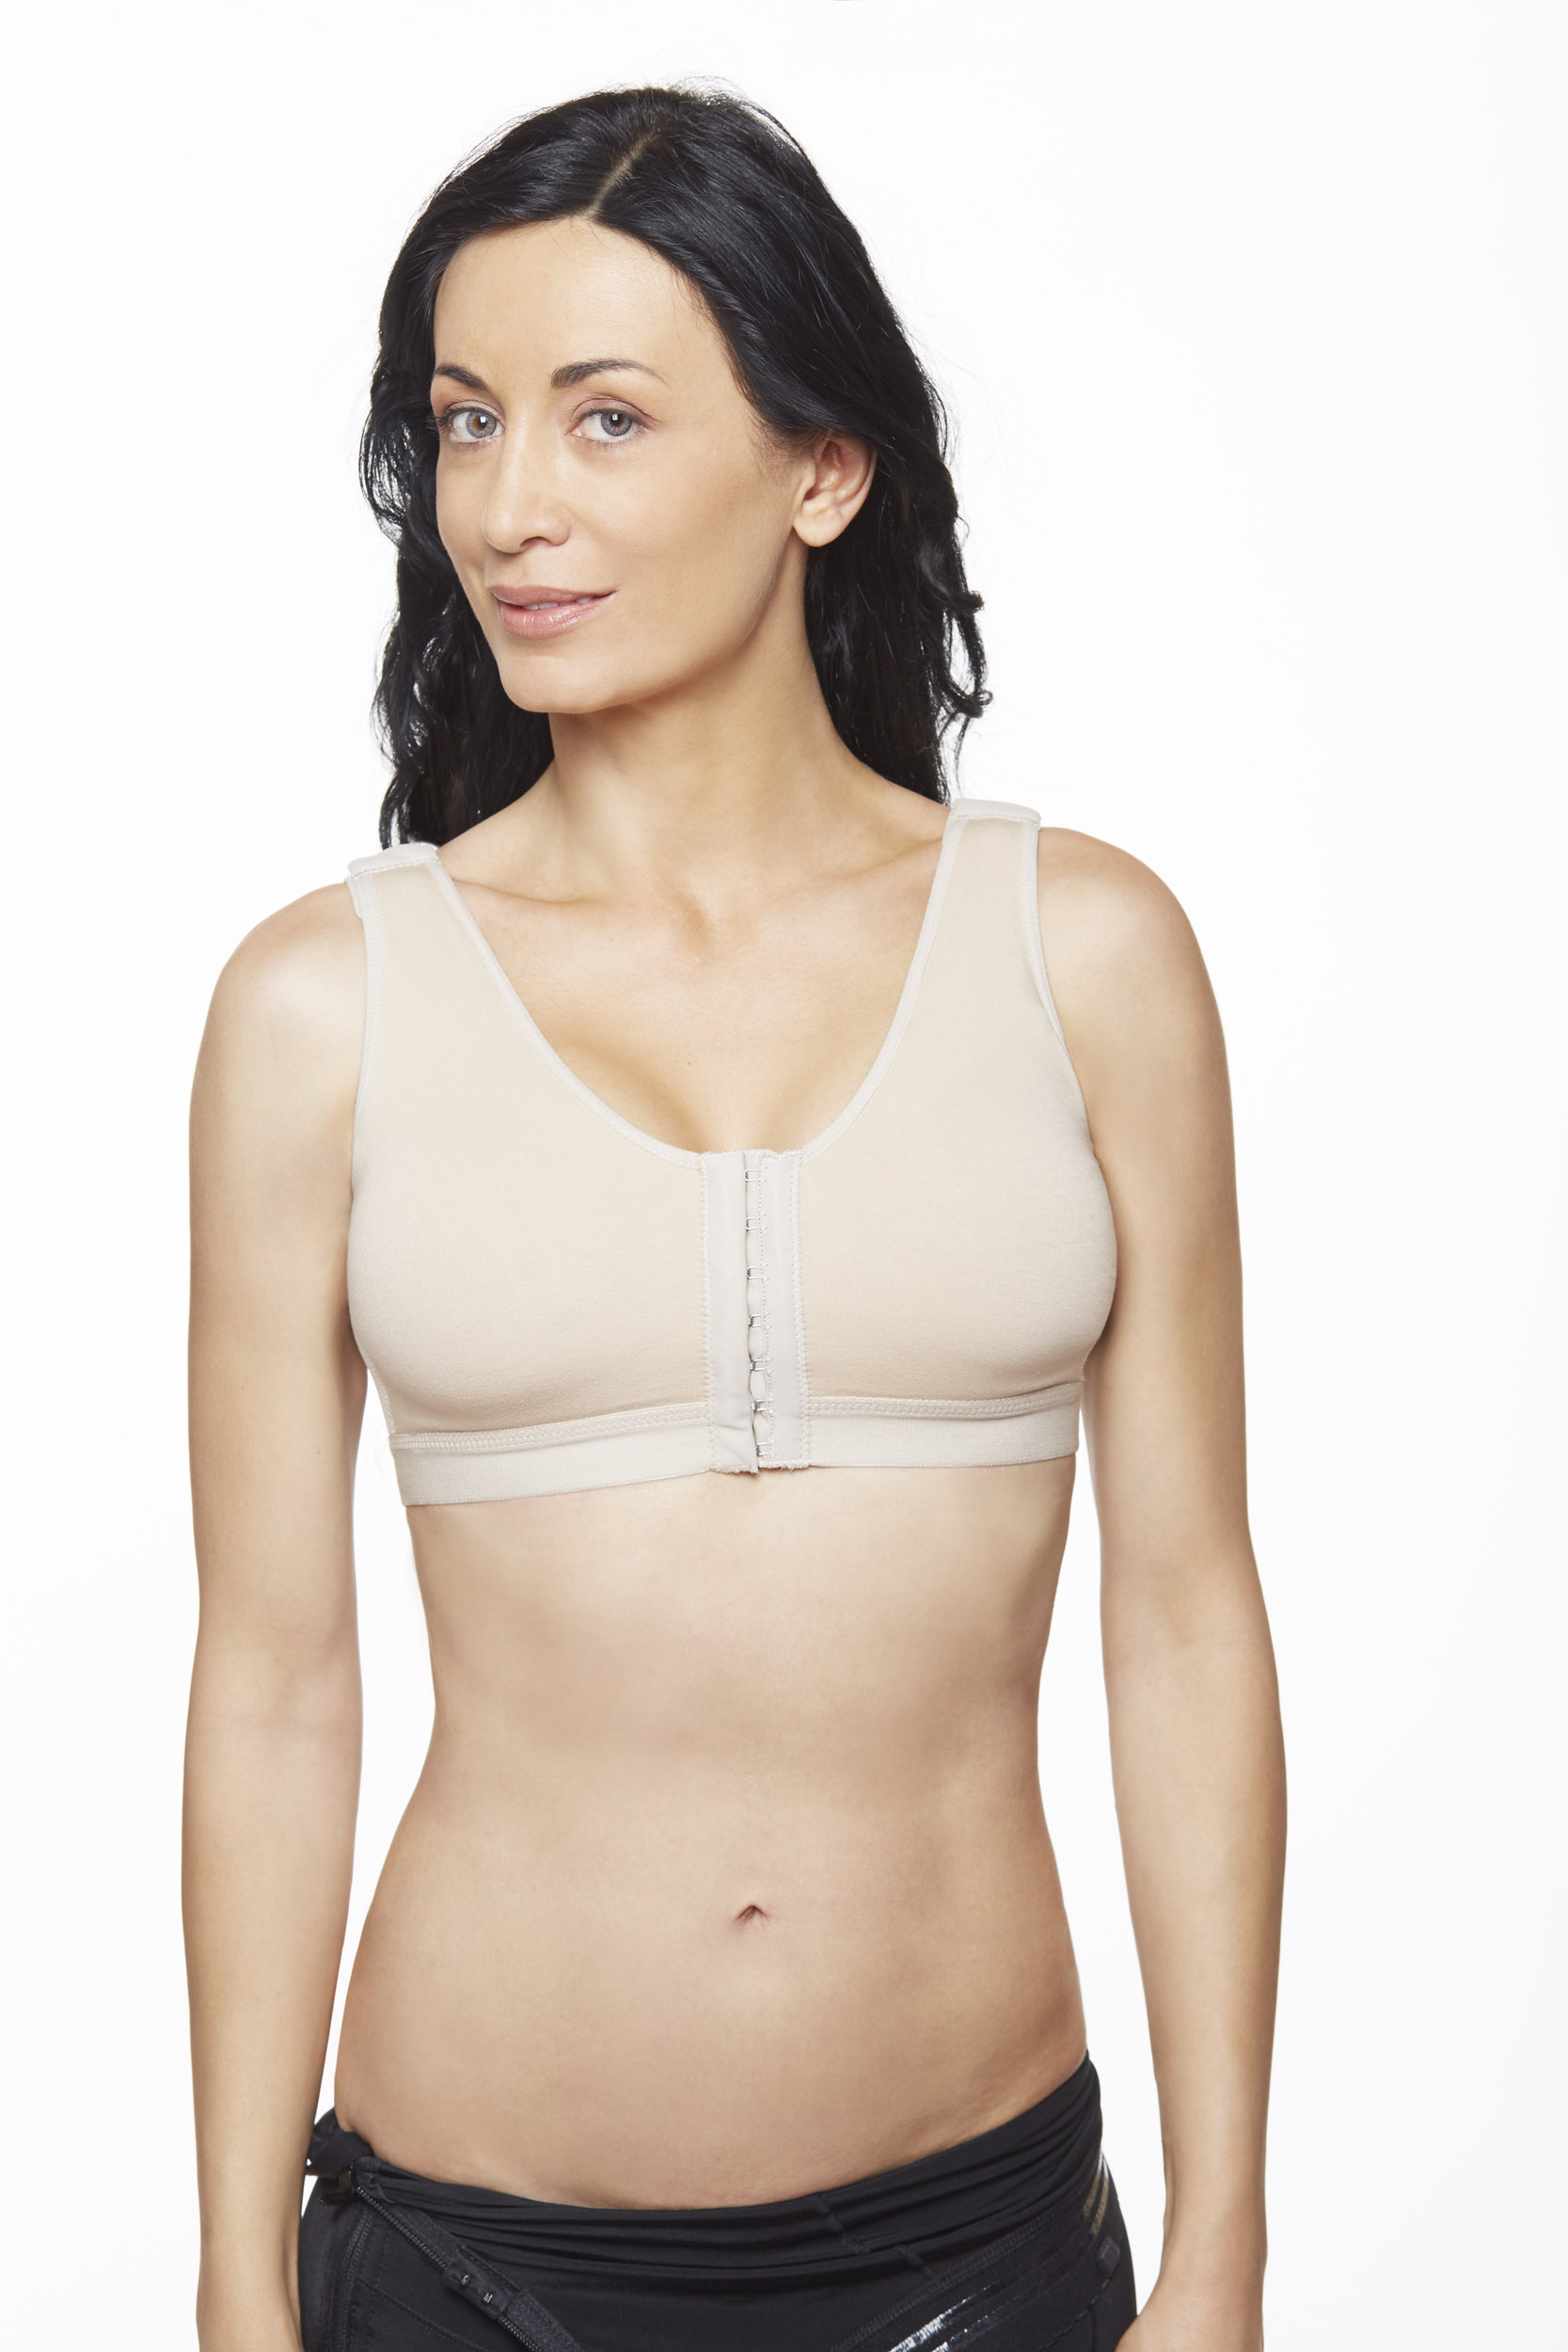 Bodice Surgery Bra without built-in implant stabilizer - CanadianMedix